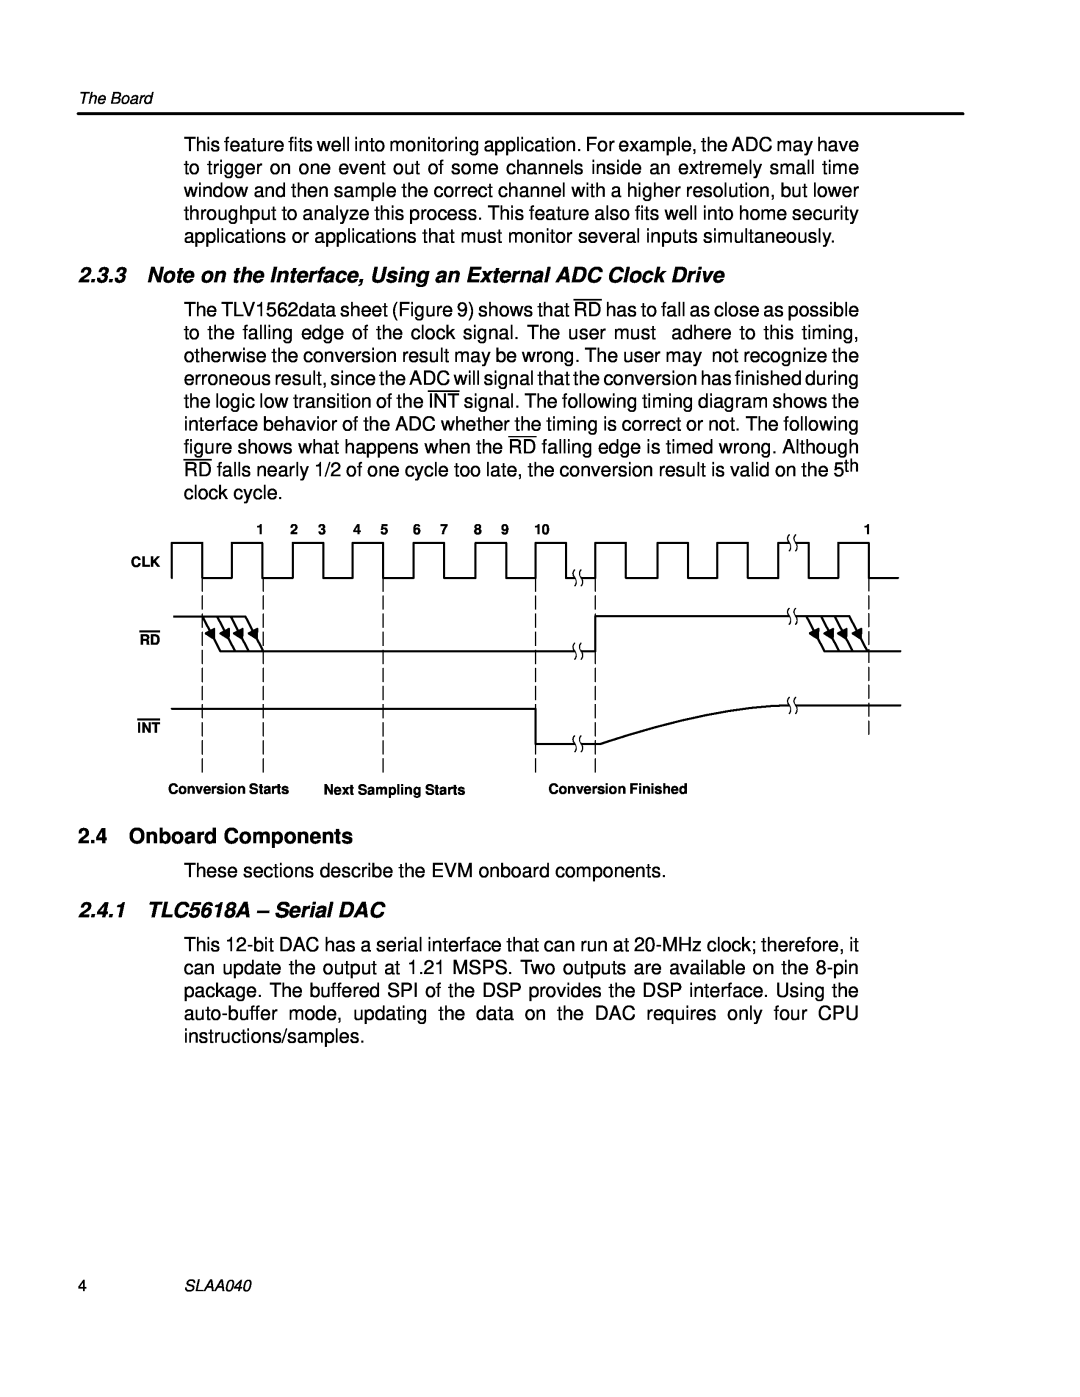 Texas Instruments TLV1562 manual Note on the Interface, Using an External ADC Clock Drive, Onboard Components 